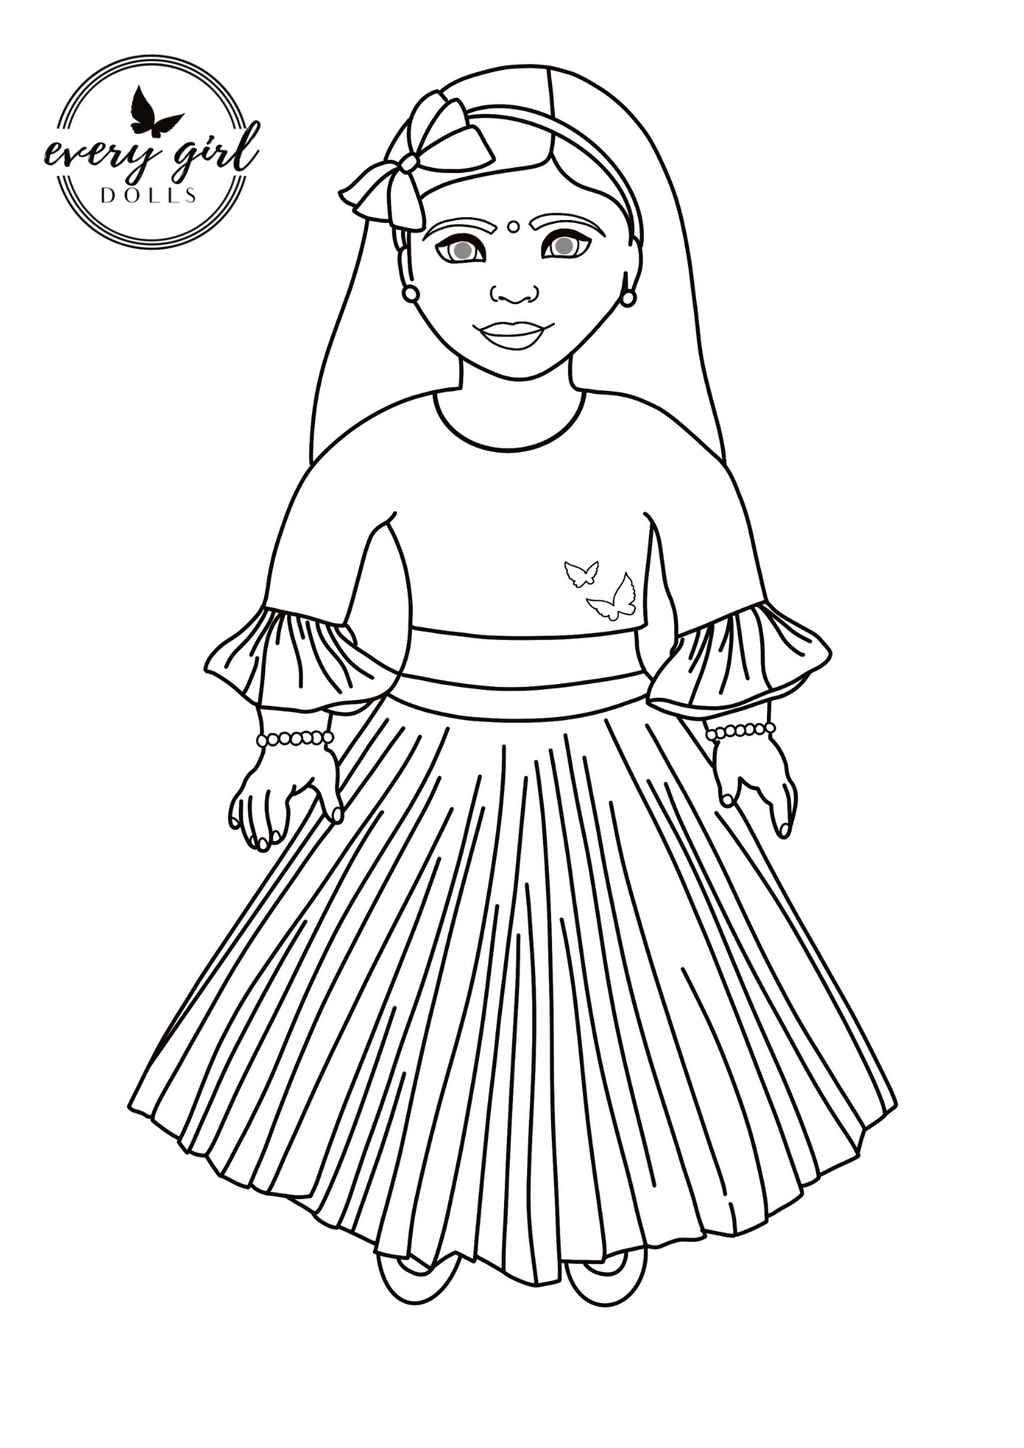 Doll Coloring Sheet - Free Download - Every Girl Dolls